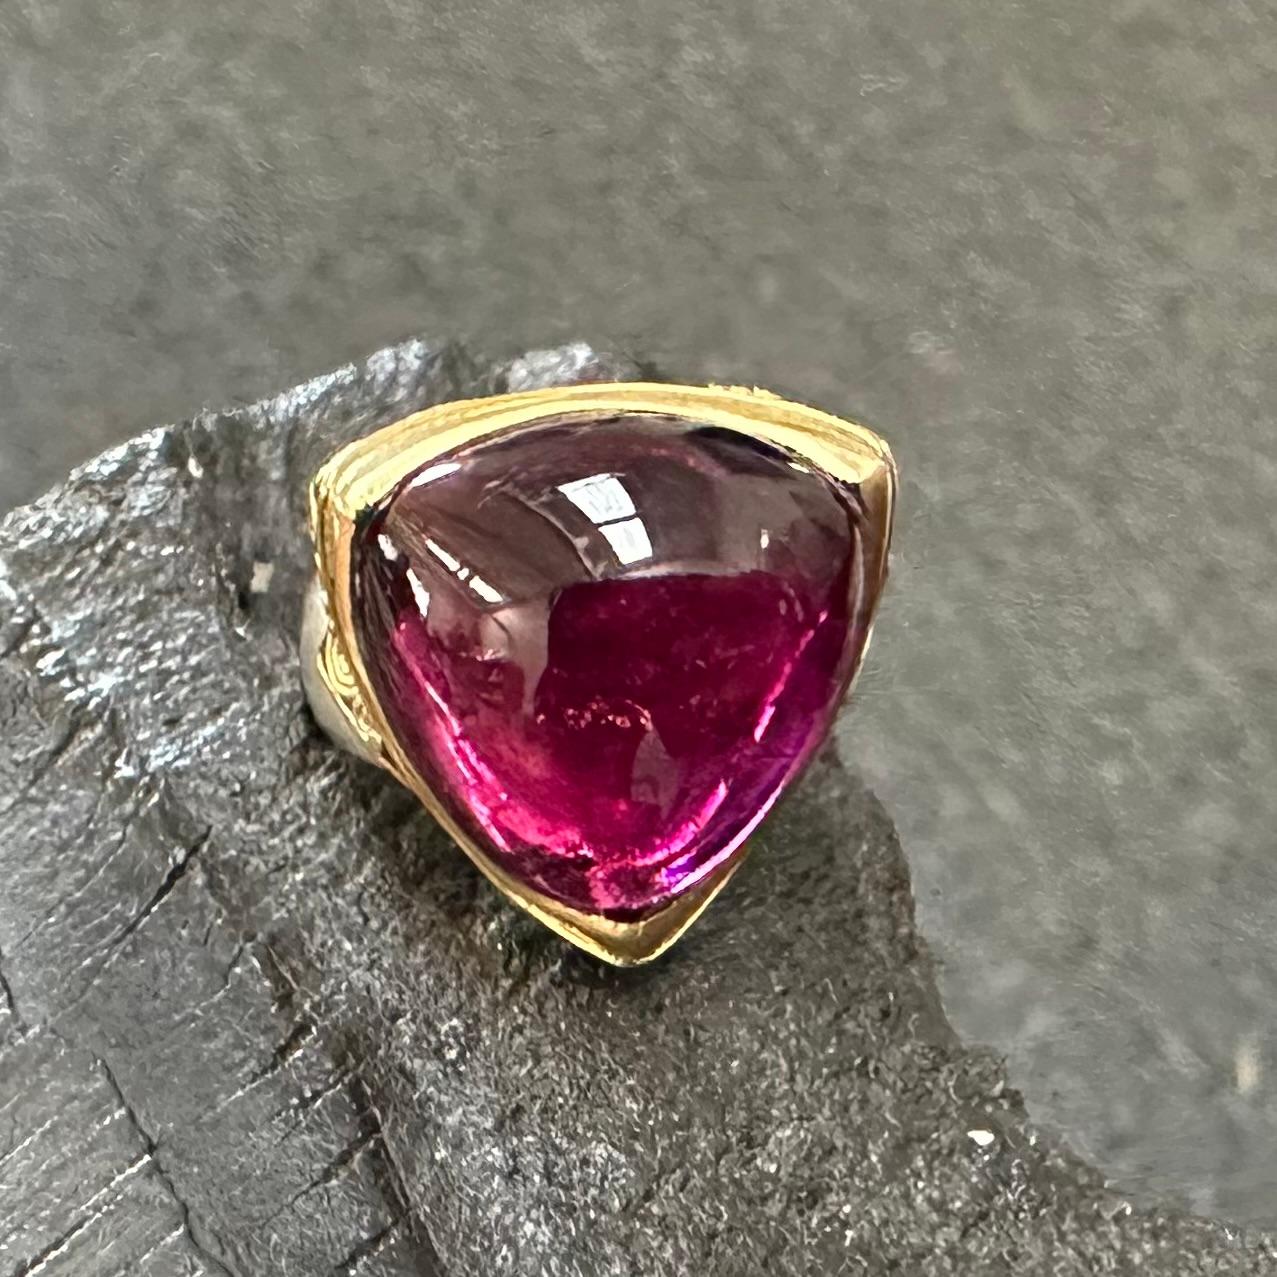 A juicy Brazilian 18 mm trillium cabochon pink tourmaline rests in a cupped handmade 18K bezel accented minimally with delicate 18K wire scroll-work at the corners and continuing on the wide matte-finish sterling shank.  Just enough ornament to